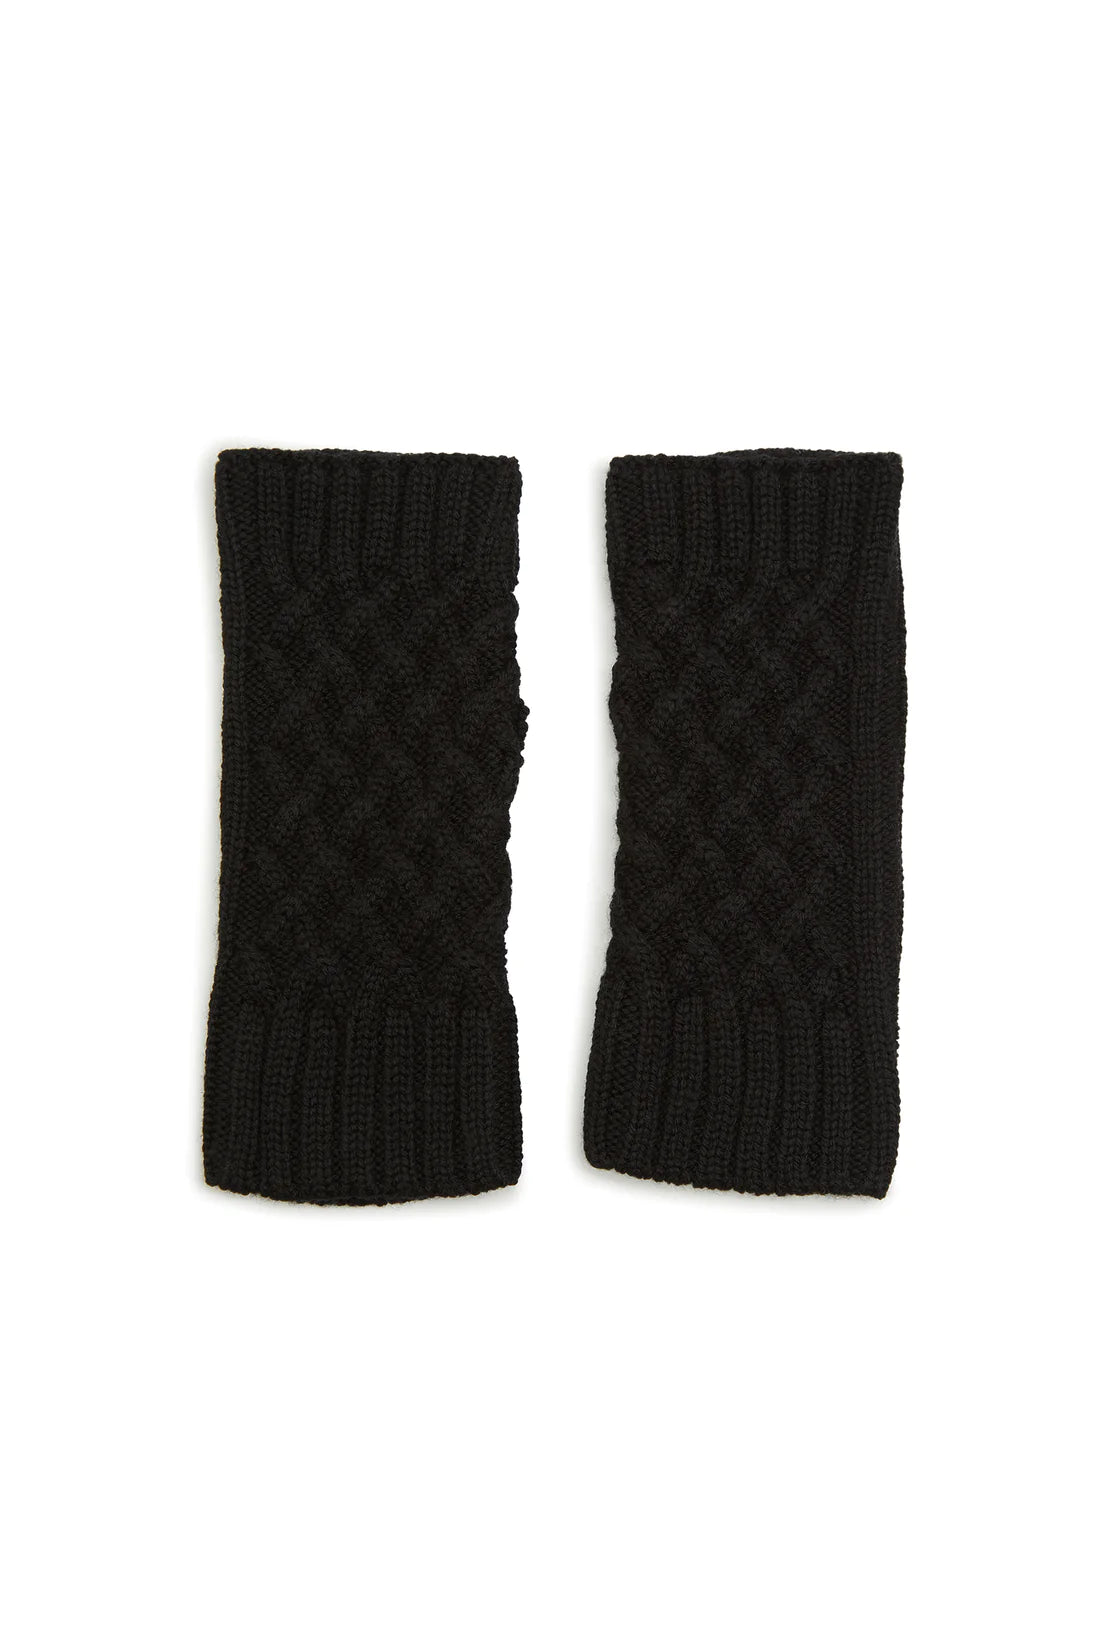 Iris & Wool | Cable Gloves Black